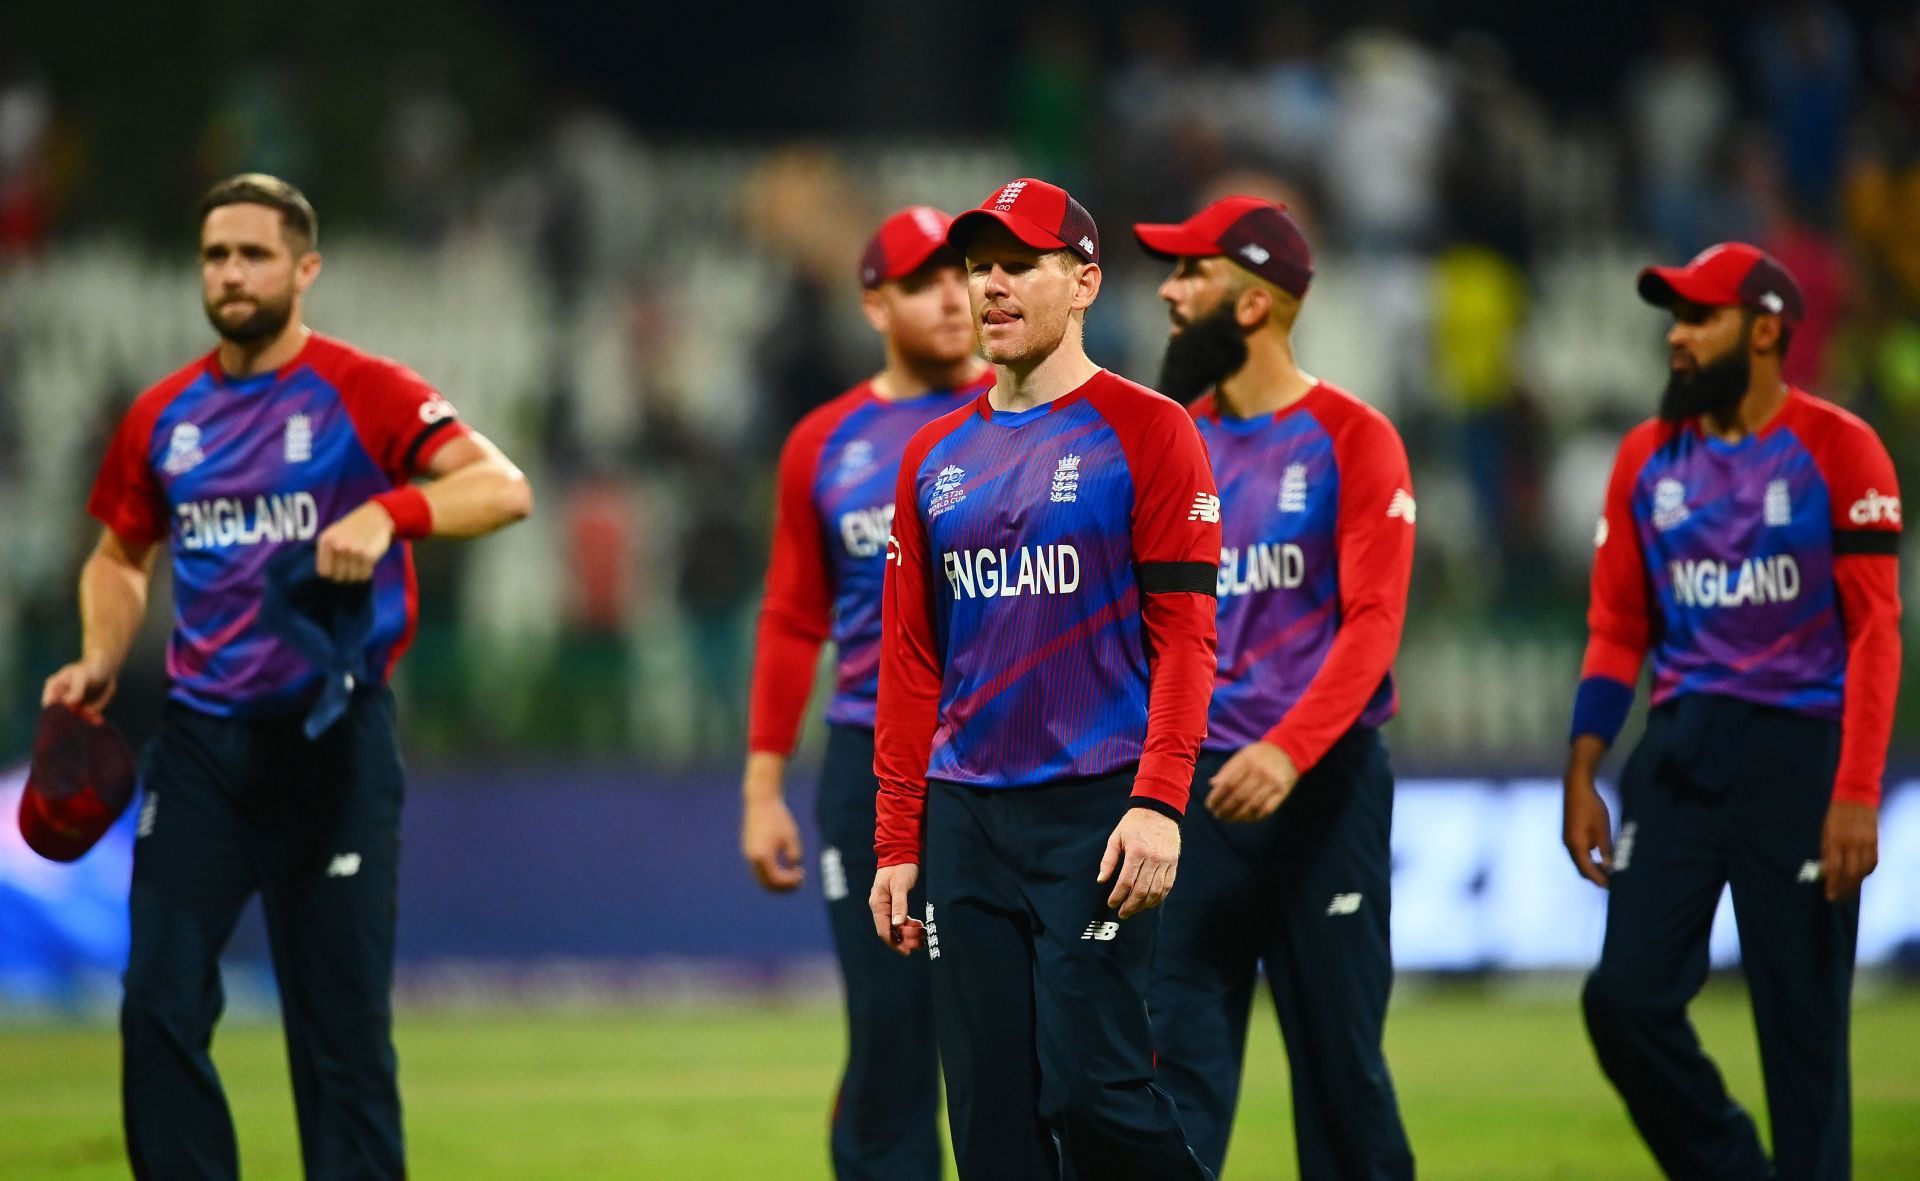 England are the number one team in the ICC T20I rankings.